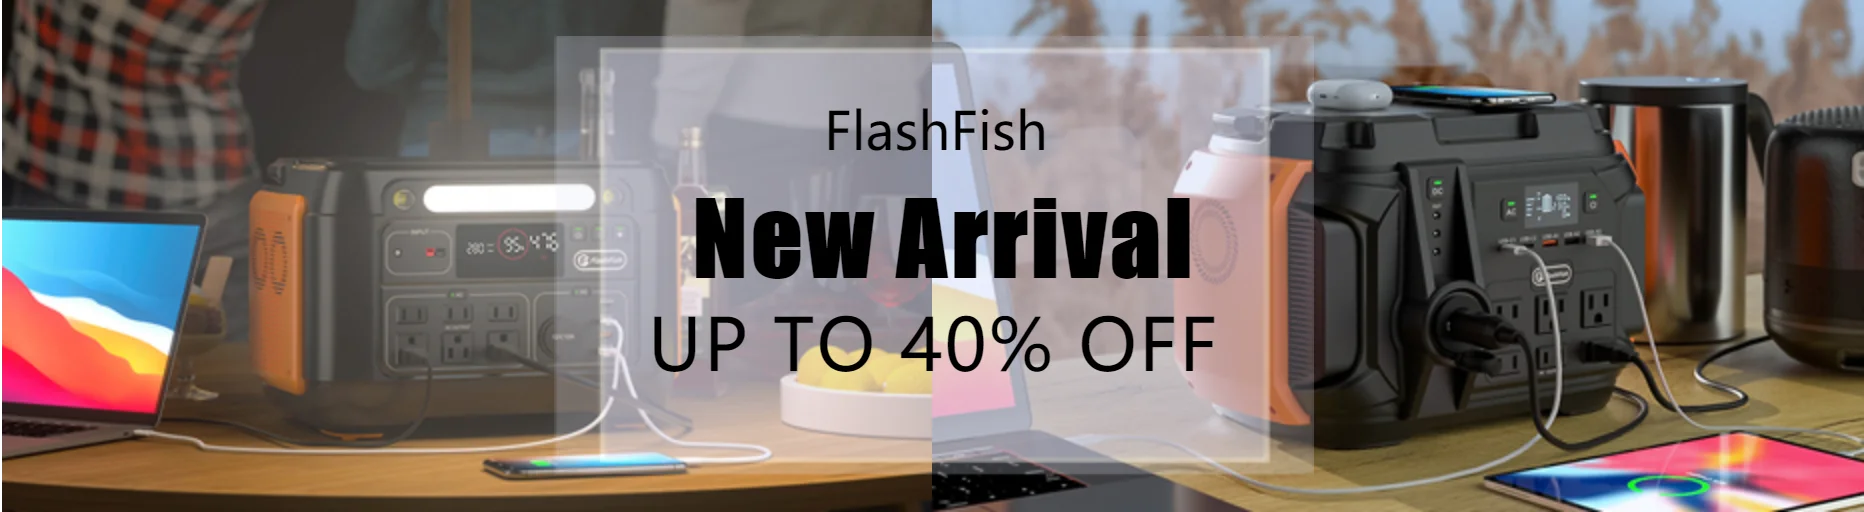 FlashFish Solar Panel, Limited time offer: Up to 40% off flash sale on solar panel charger.